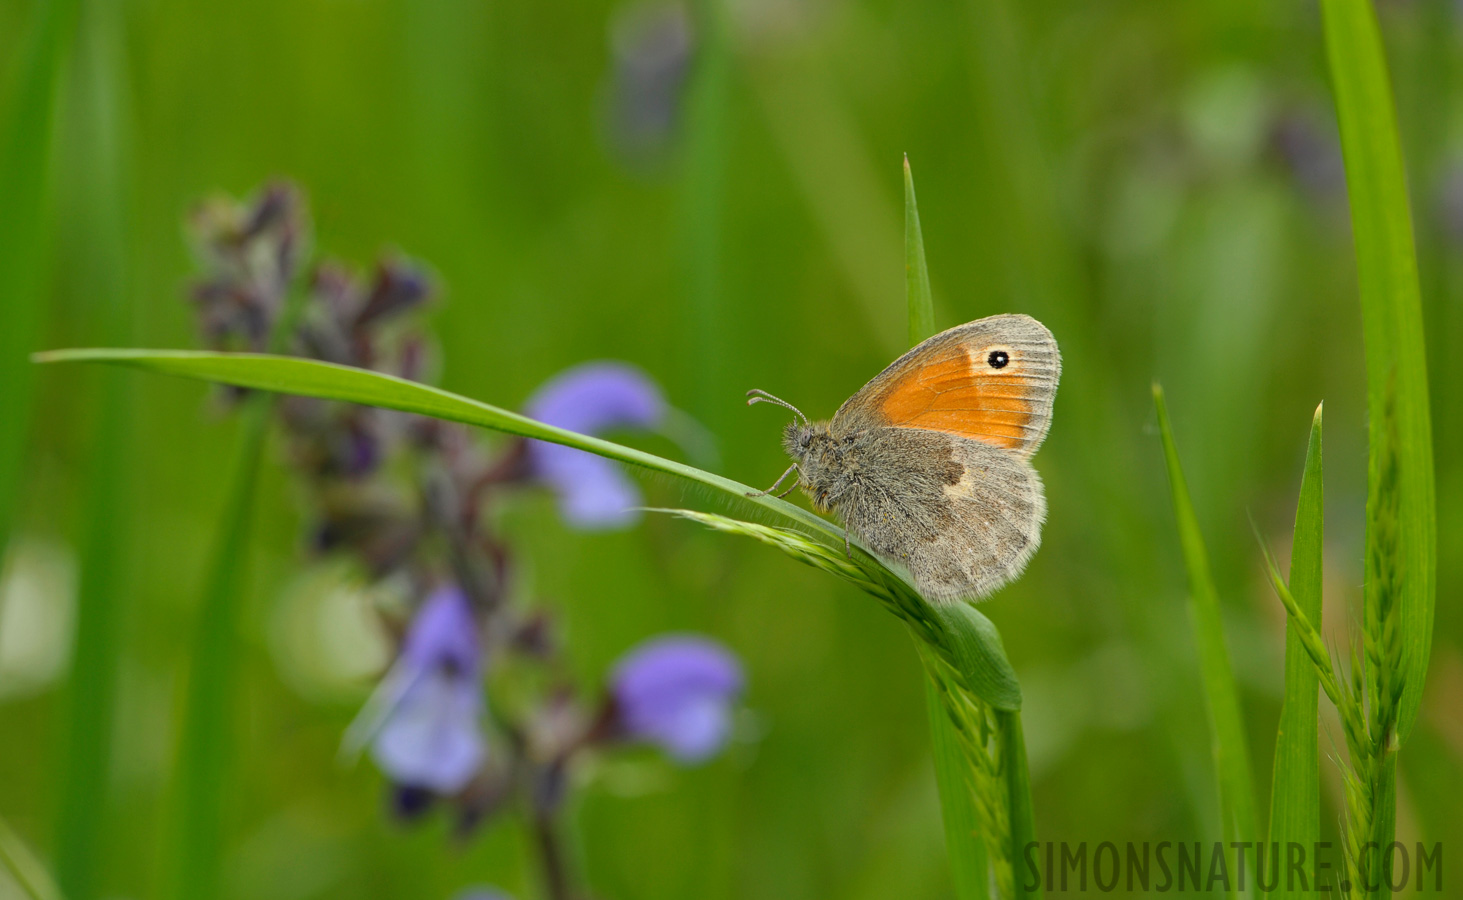 Coenonympha pamphilus [105 mm, 1/160 sec at f / 11, ISO 400]